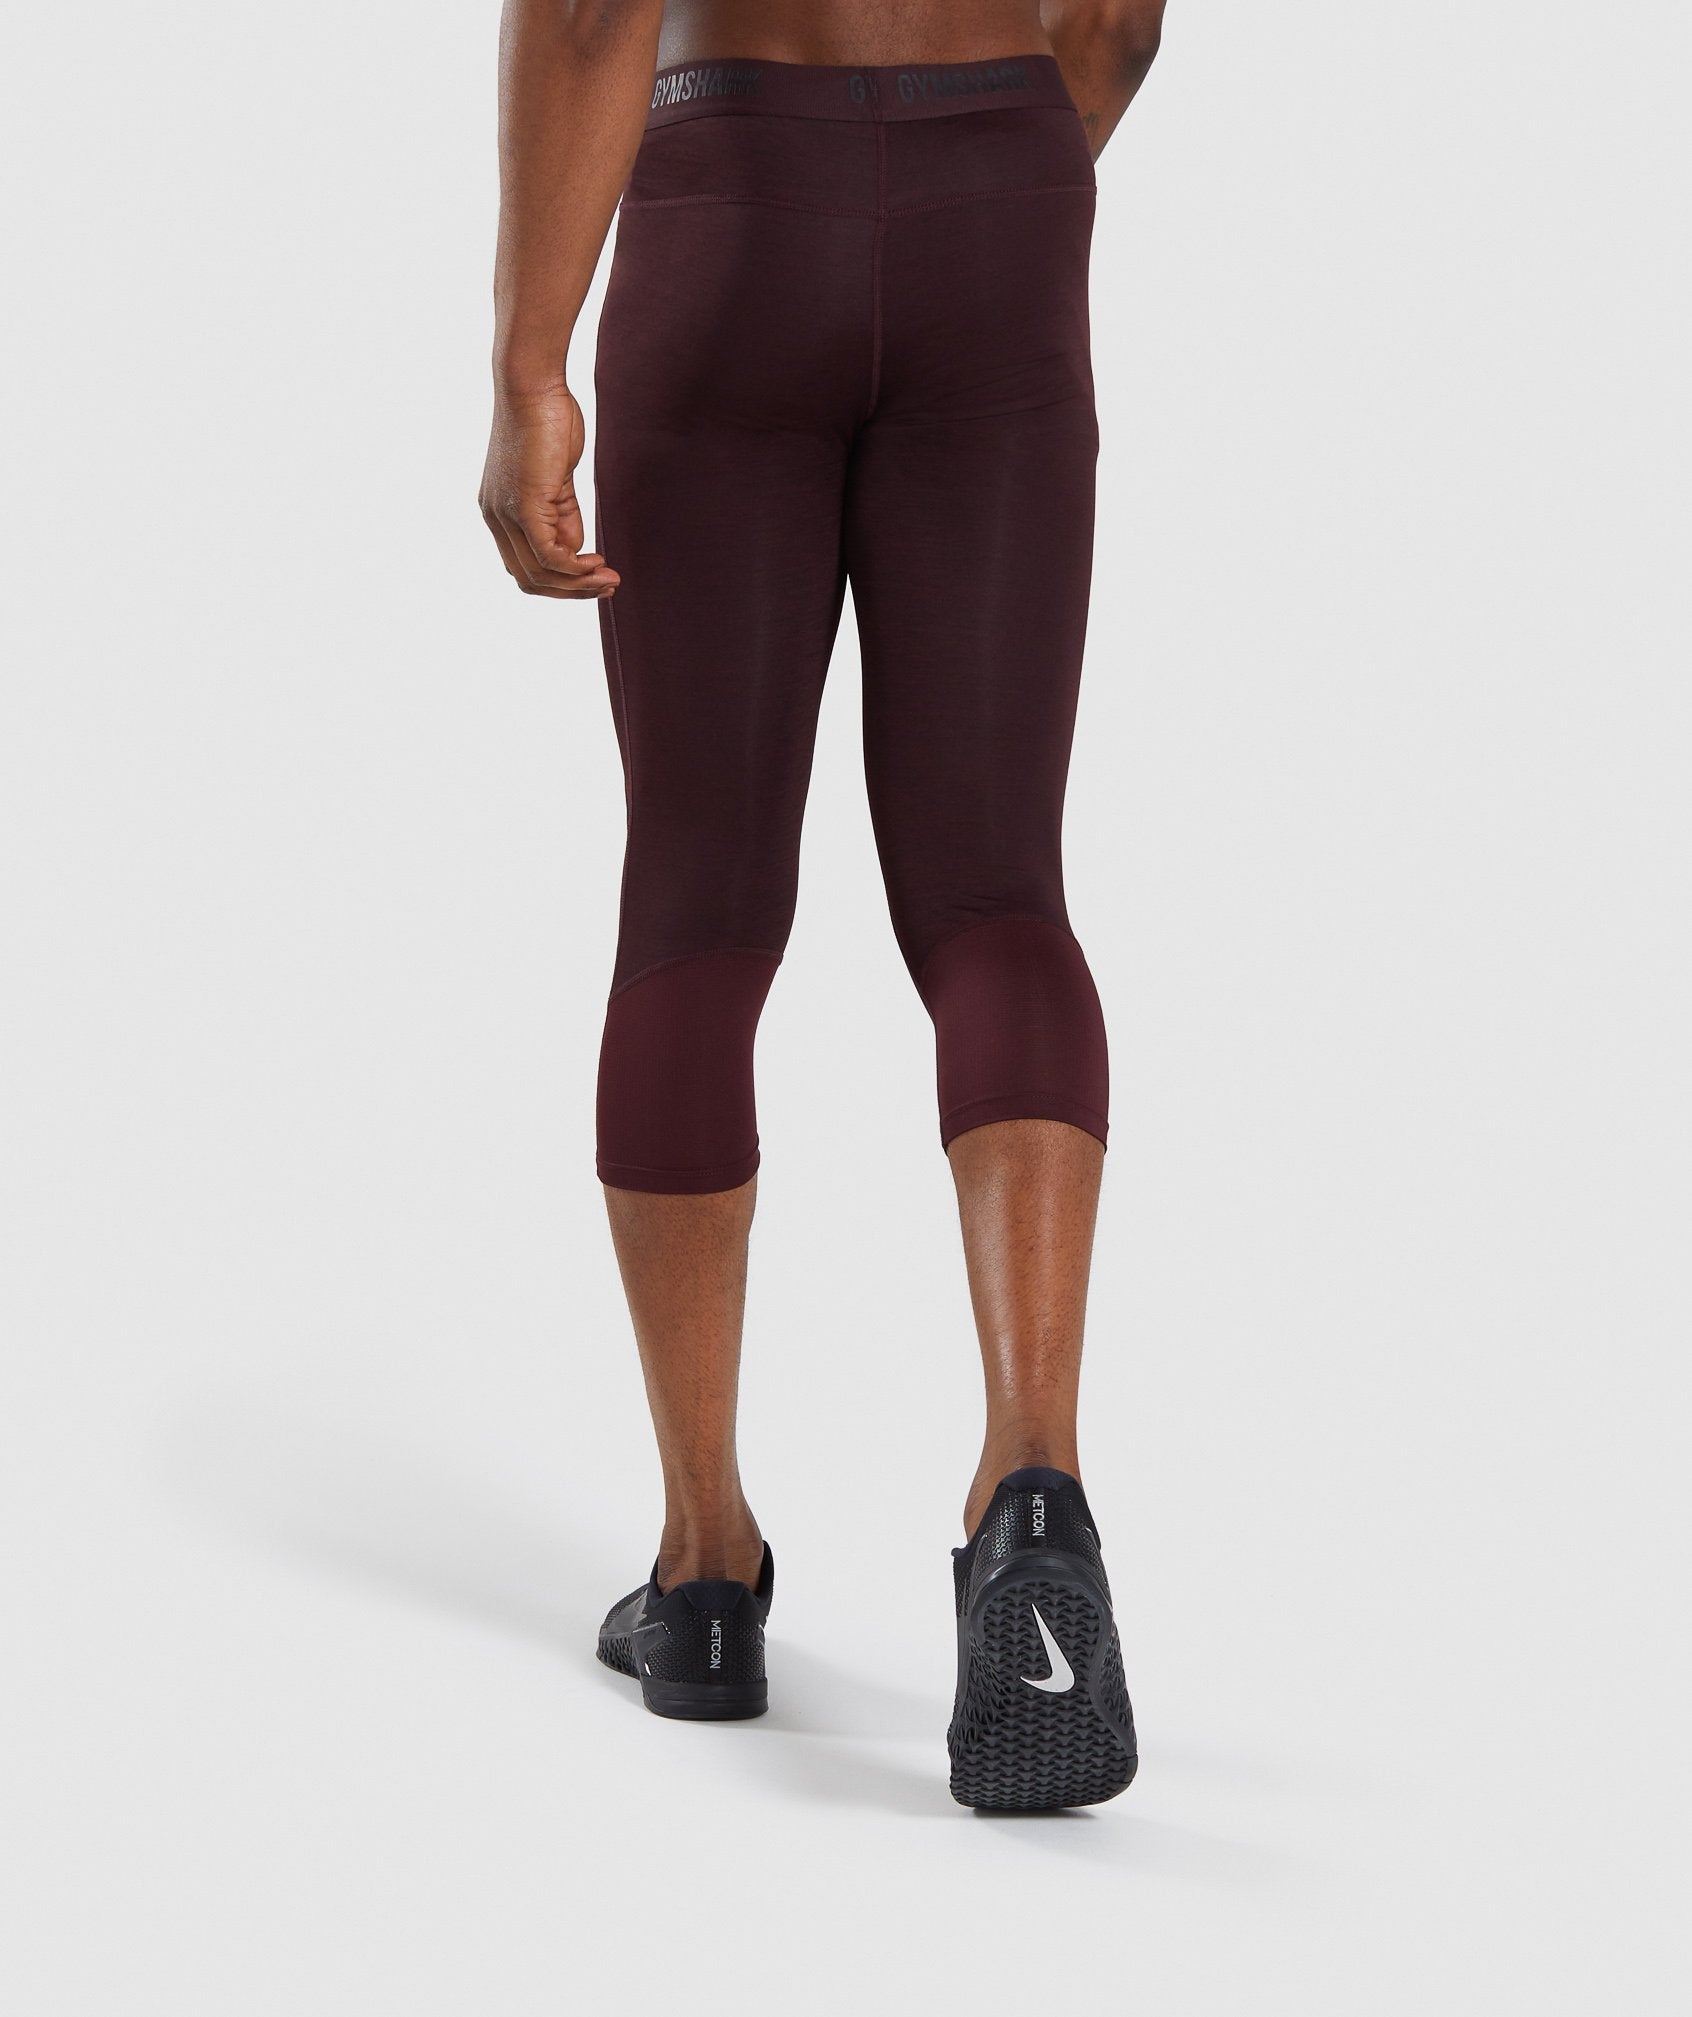 Element+ Baselayer 3/4 Leggings in Ox Red Marl - view 2